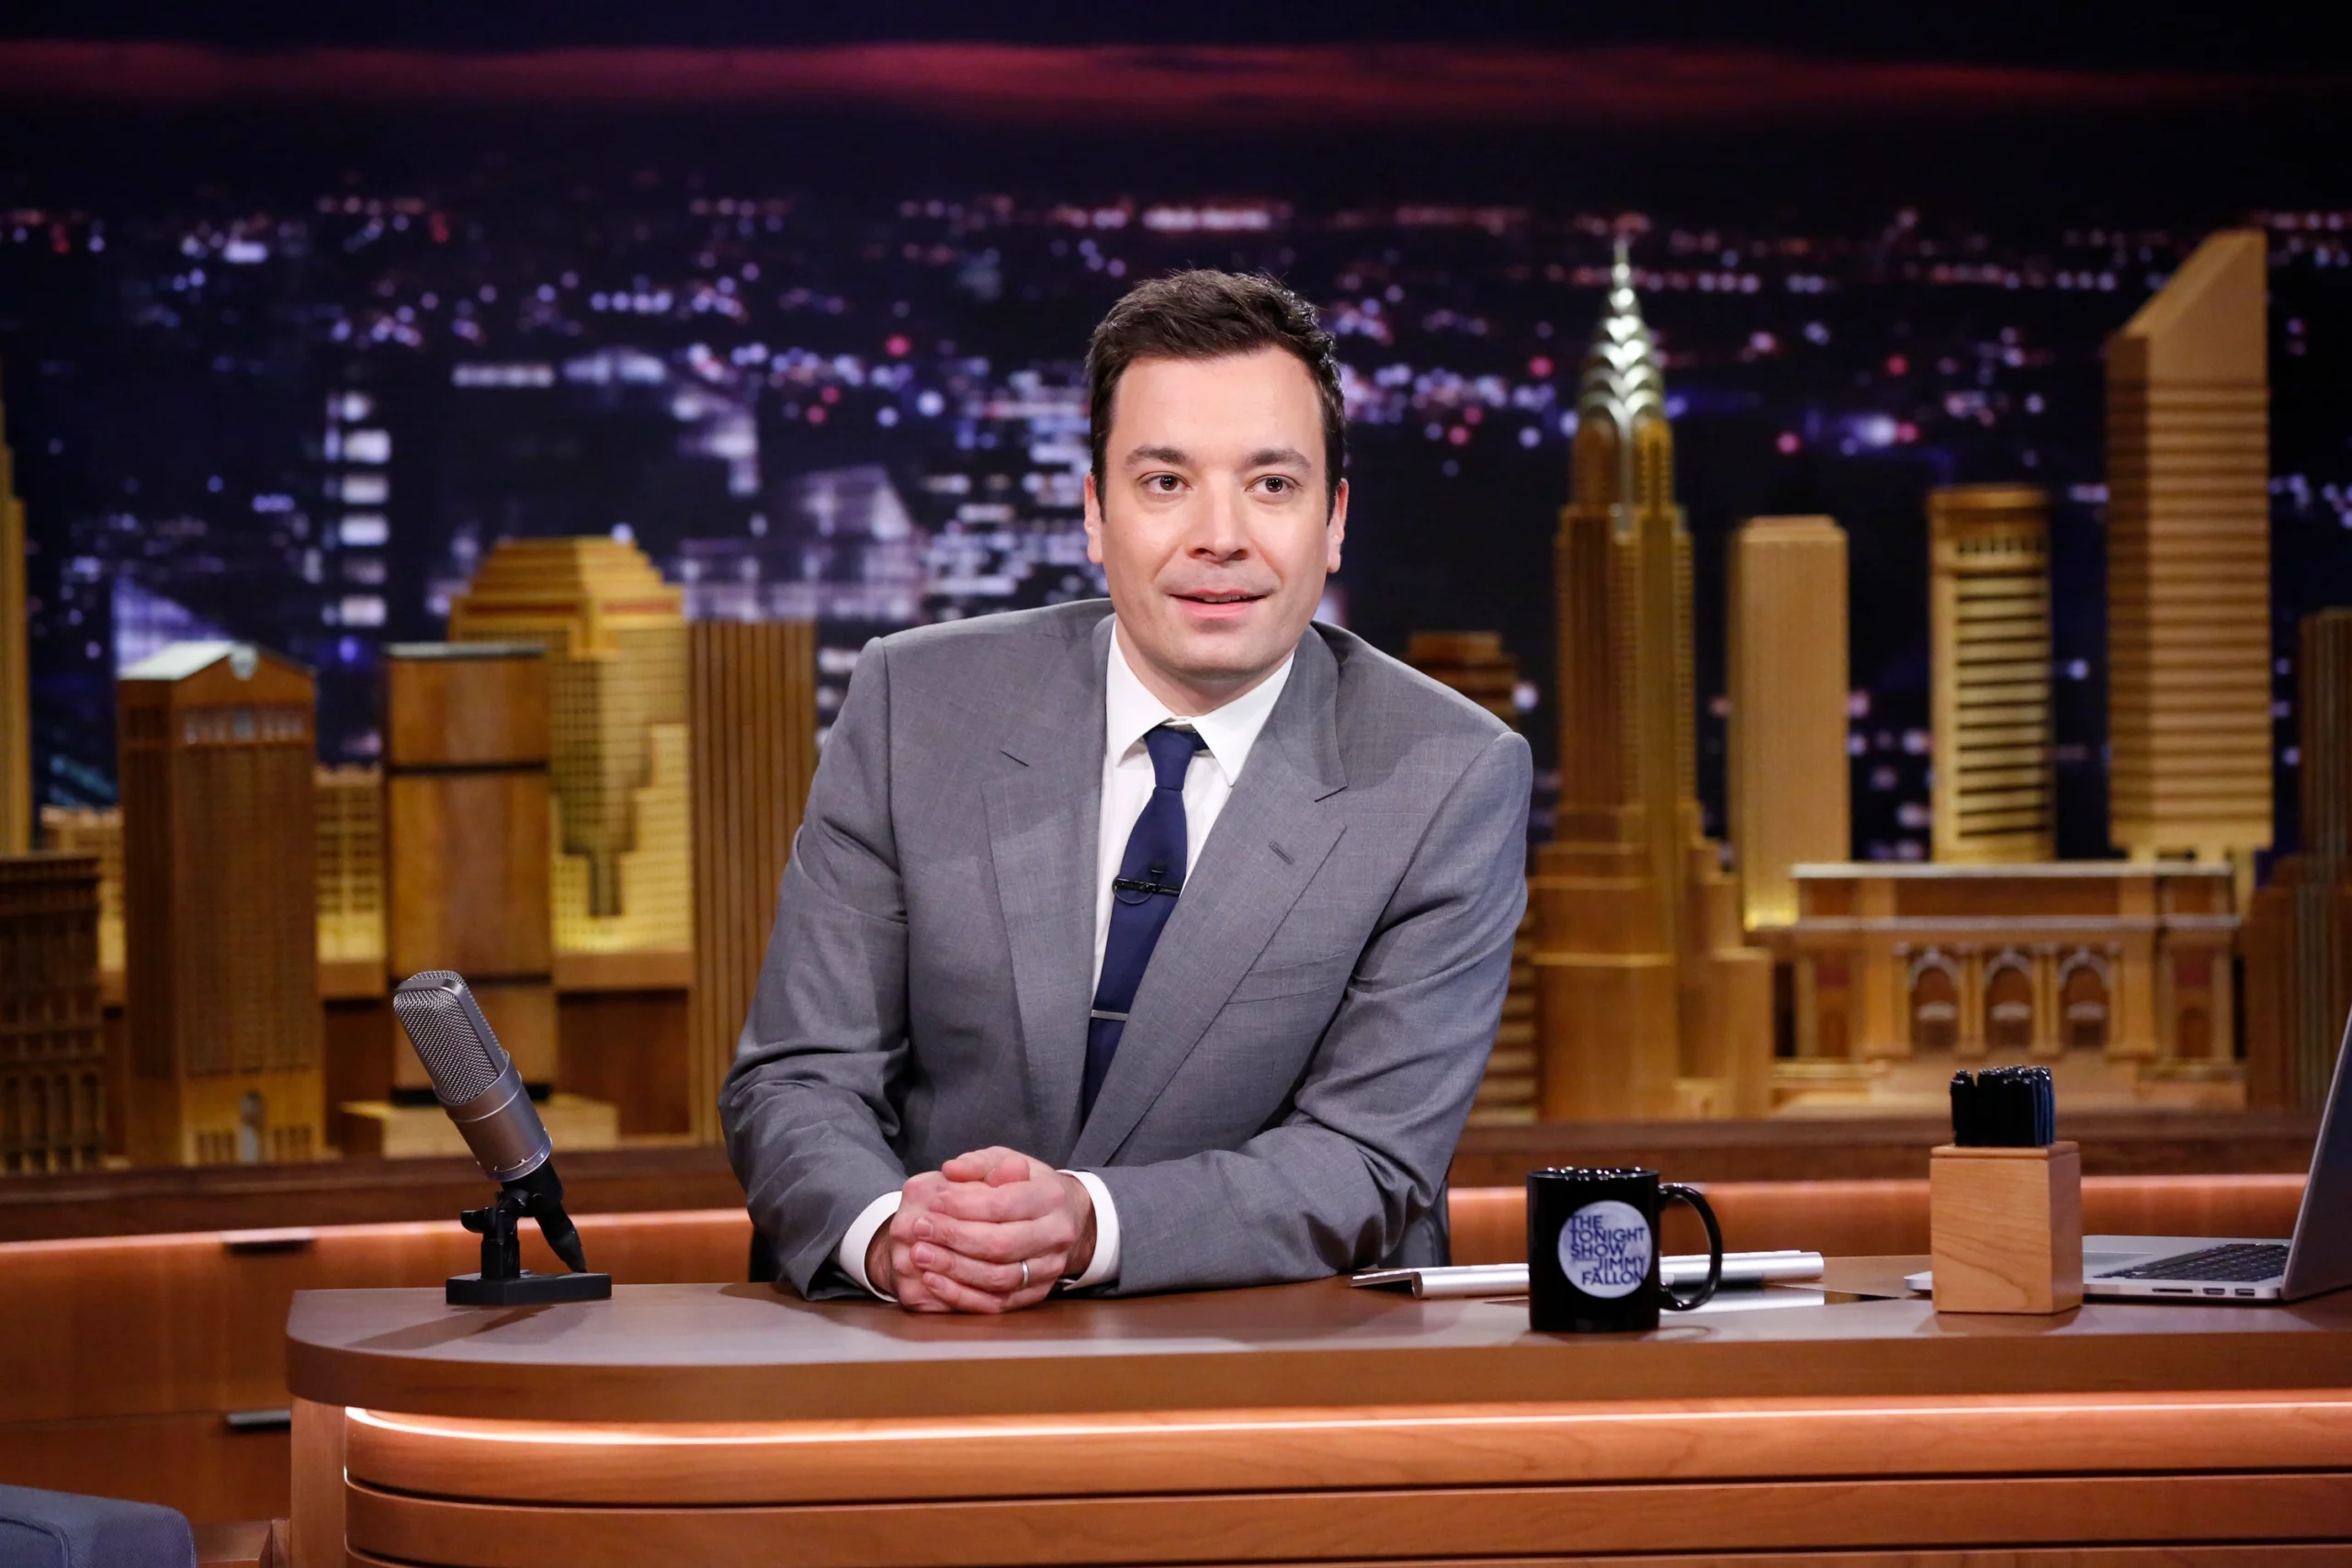 From Late Night Host to Singing Sensation: Jimmy Fallon's 'The Voice' Experience